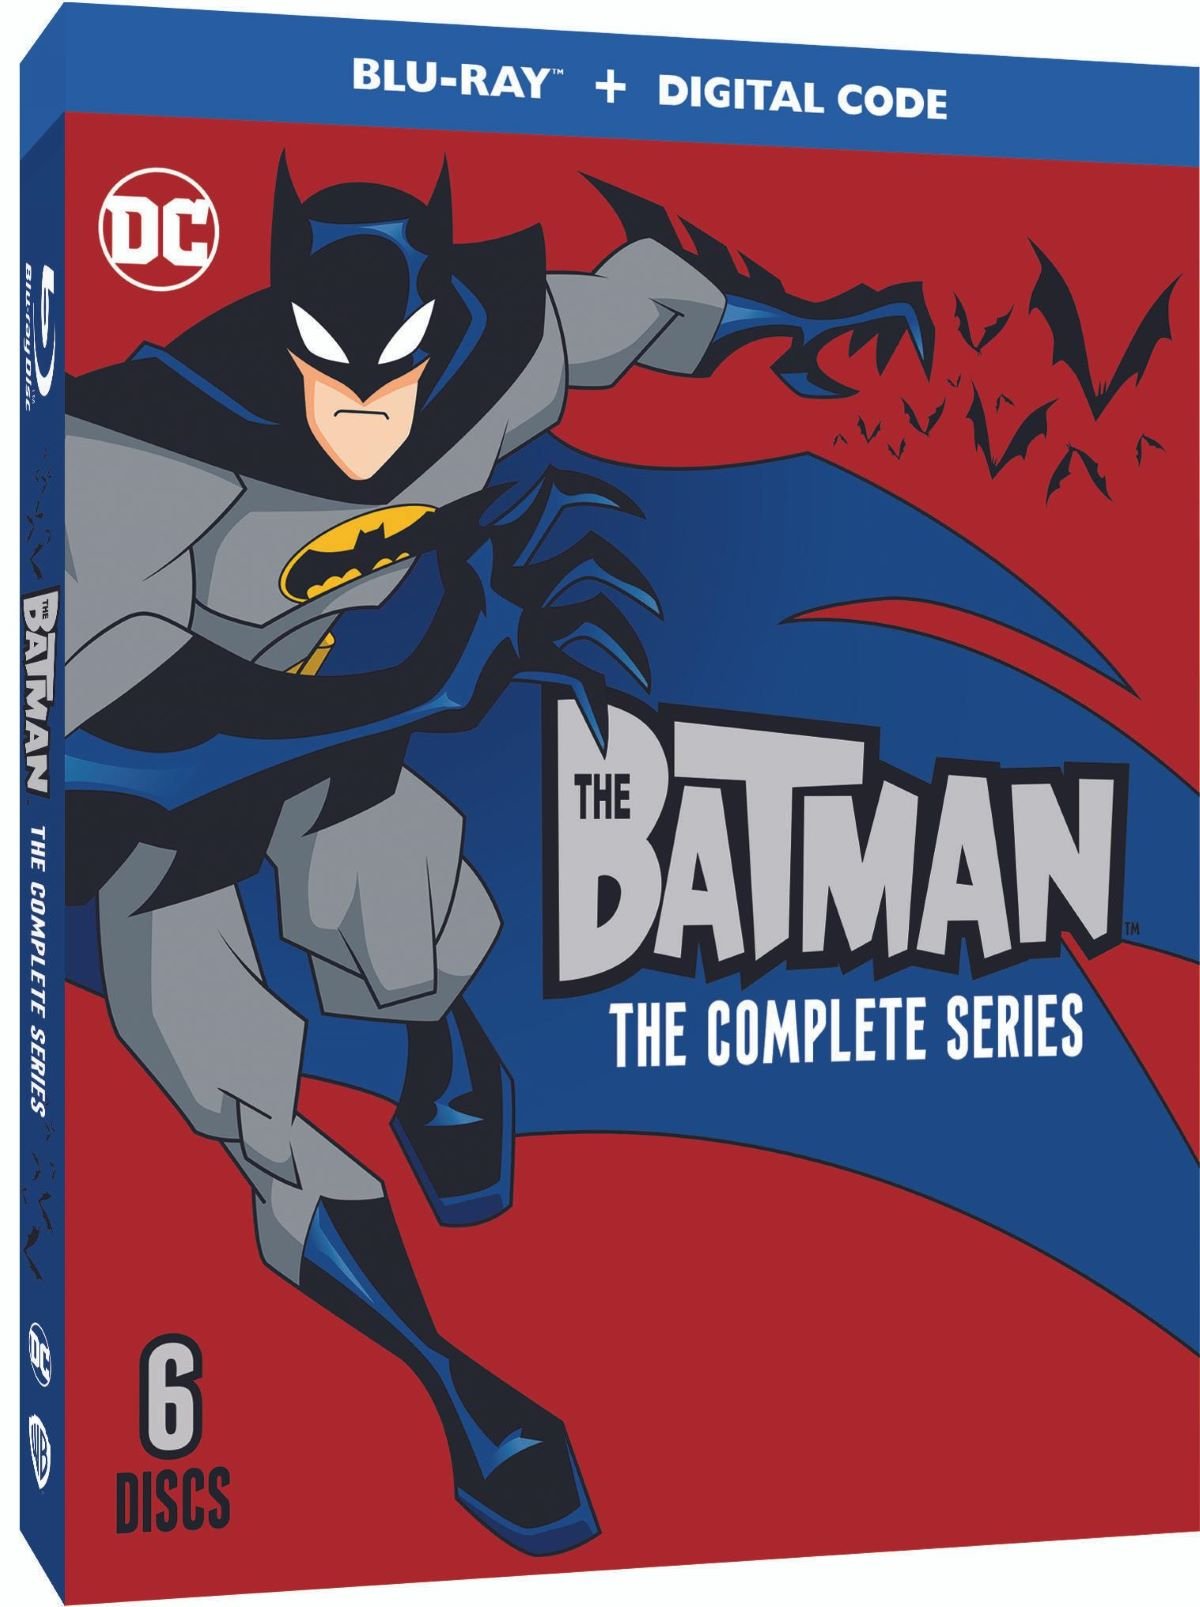 The Batman: The Complete Series' Is Coming to Blu-Ray